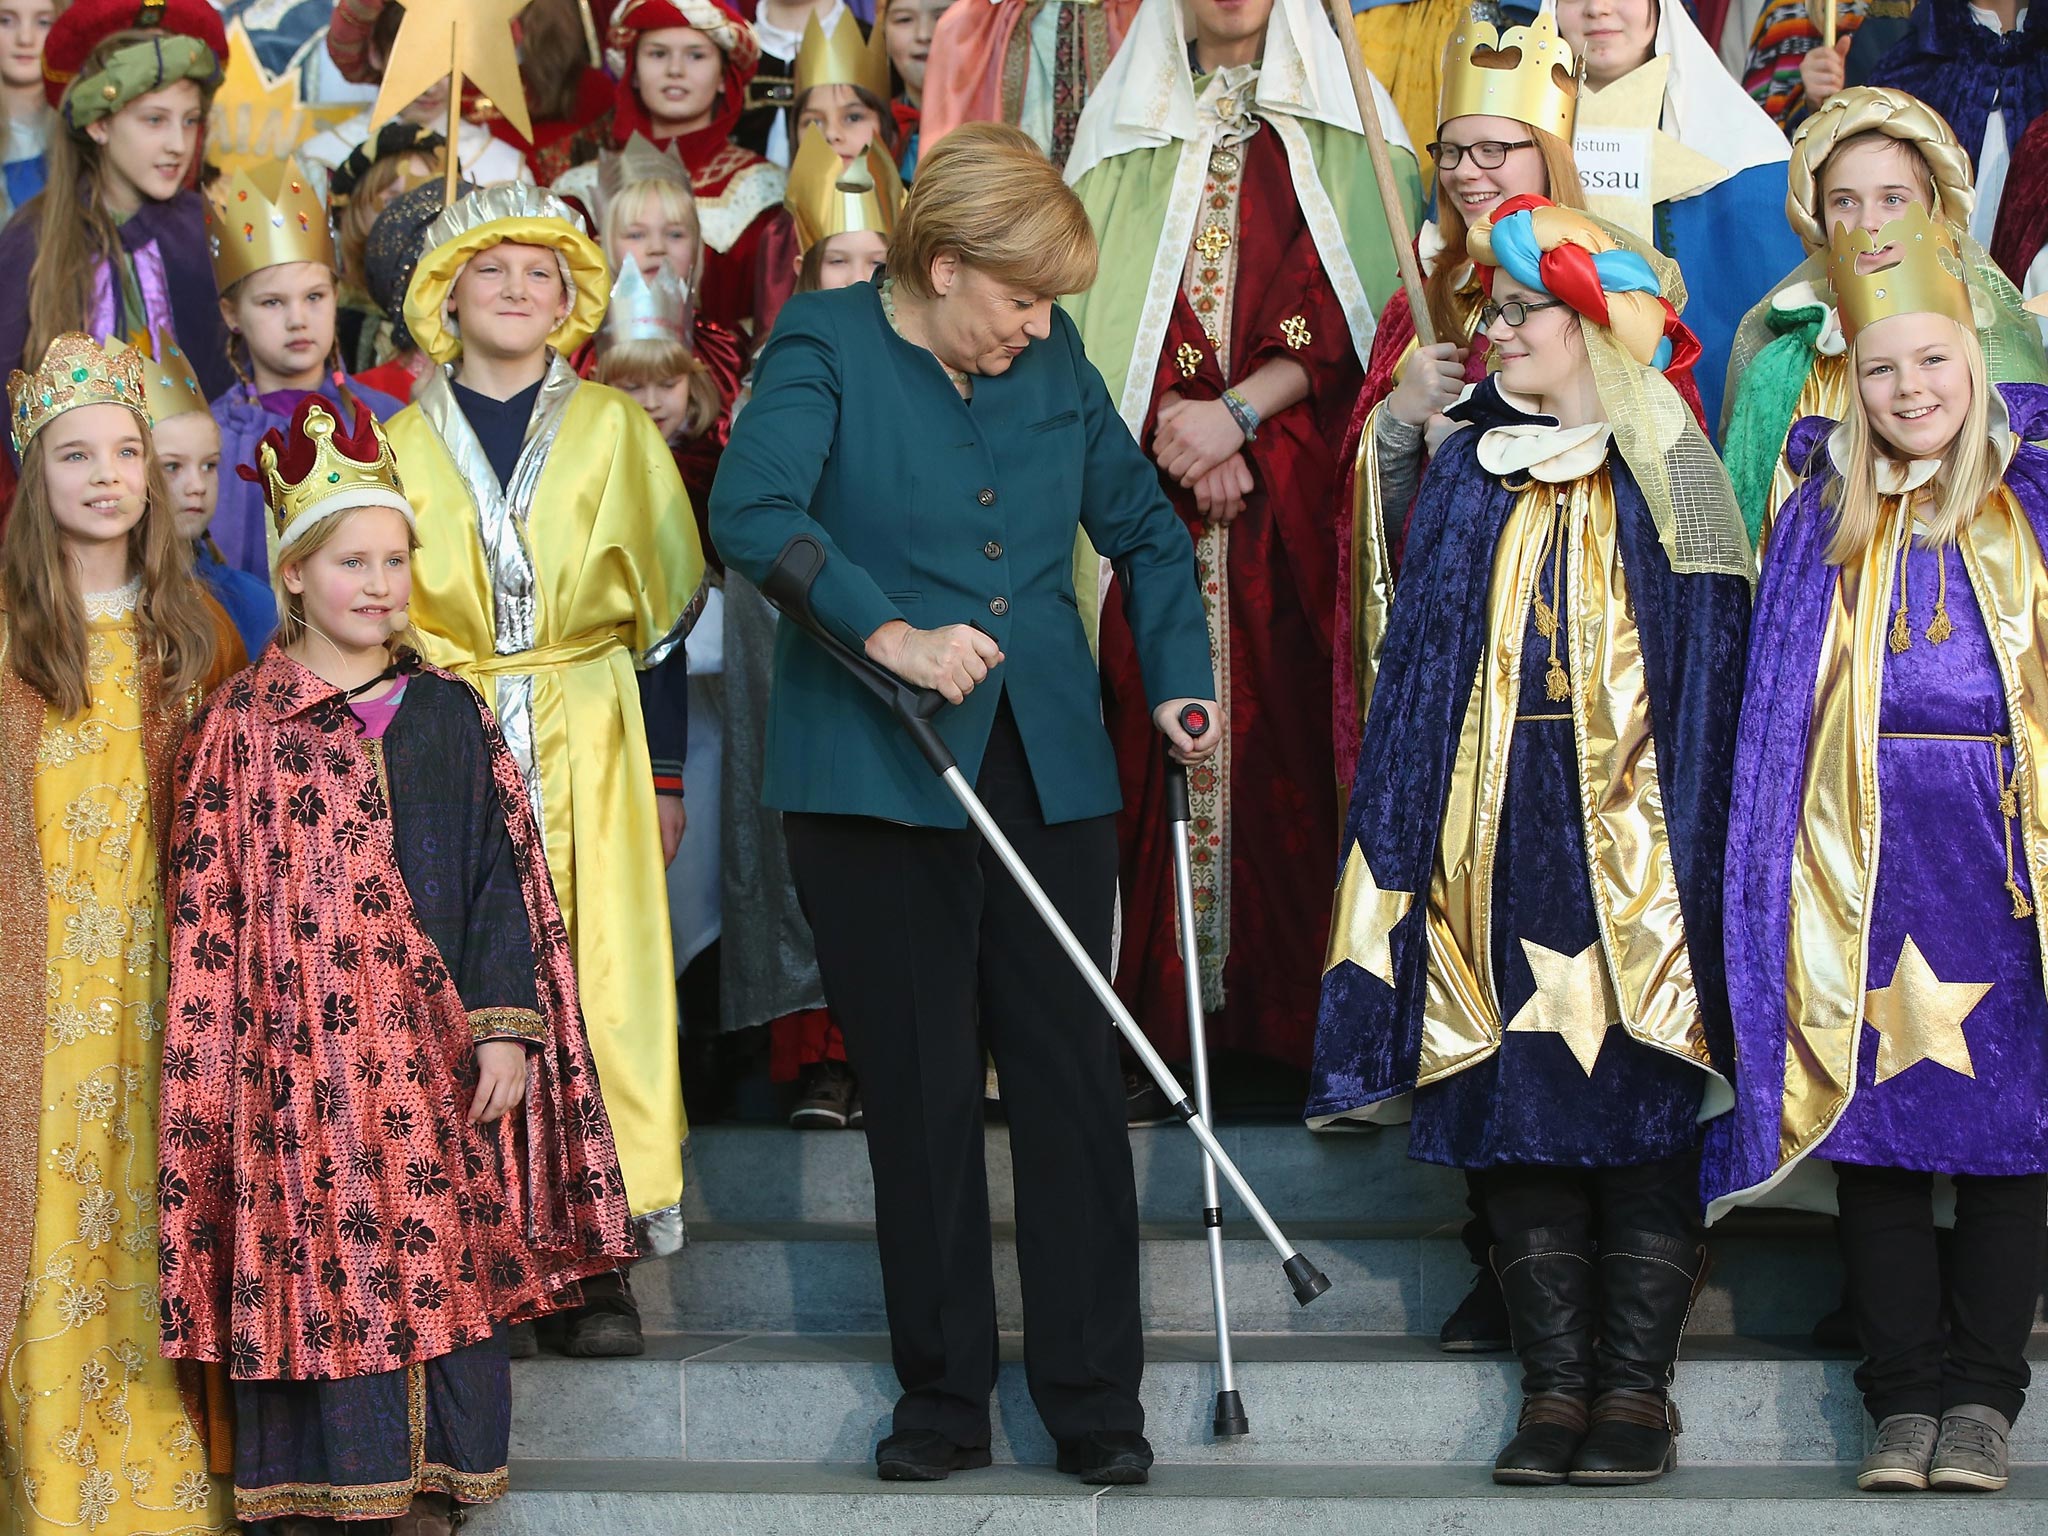 German Chancellor Angela Merkel stands with crutches as she attends a gathering of Epiphany child singers dressed as the Three Kings at the Chancellery